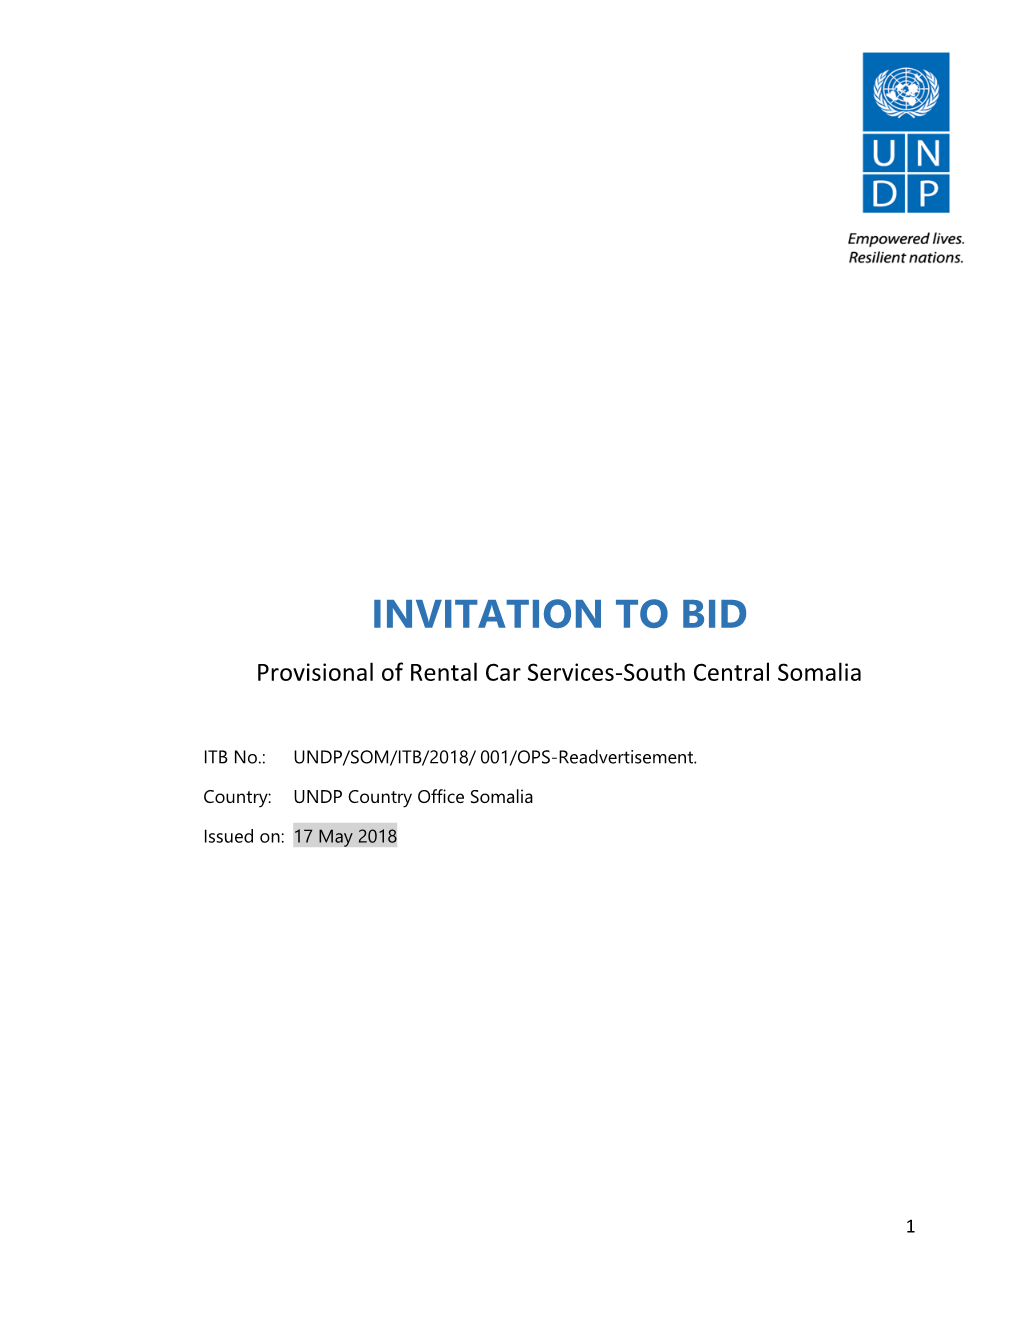 ITB No.: UNDP/SOM/ITB/2018/ 001/OPS-Readvertisement